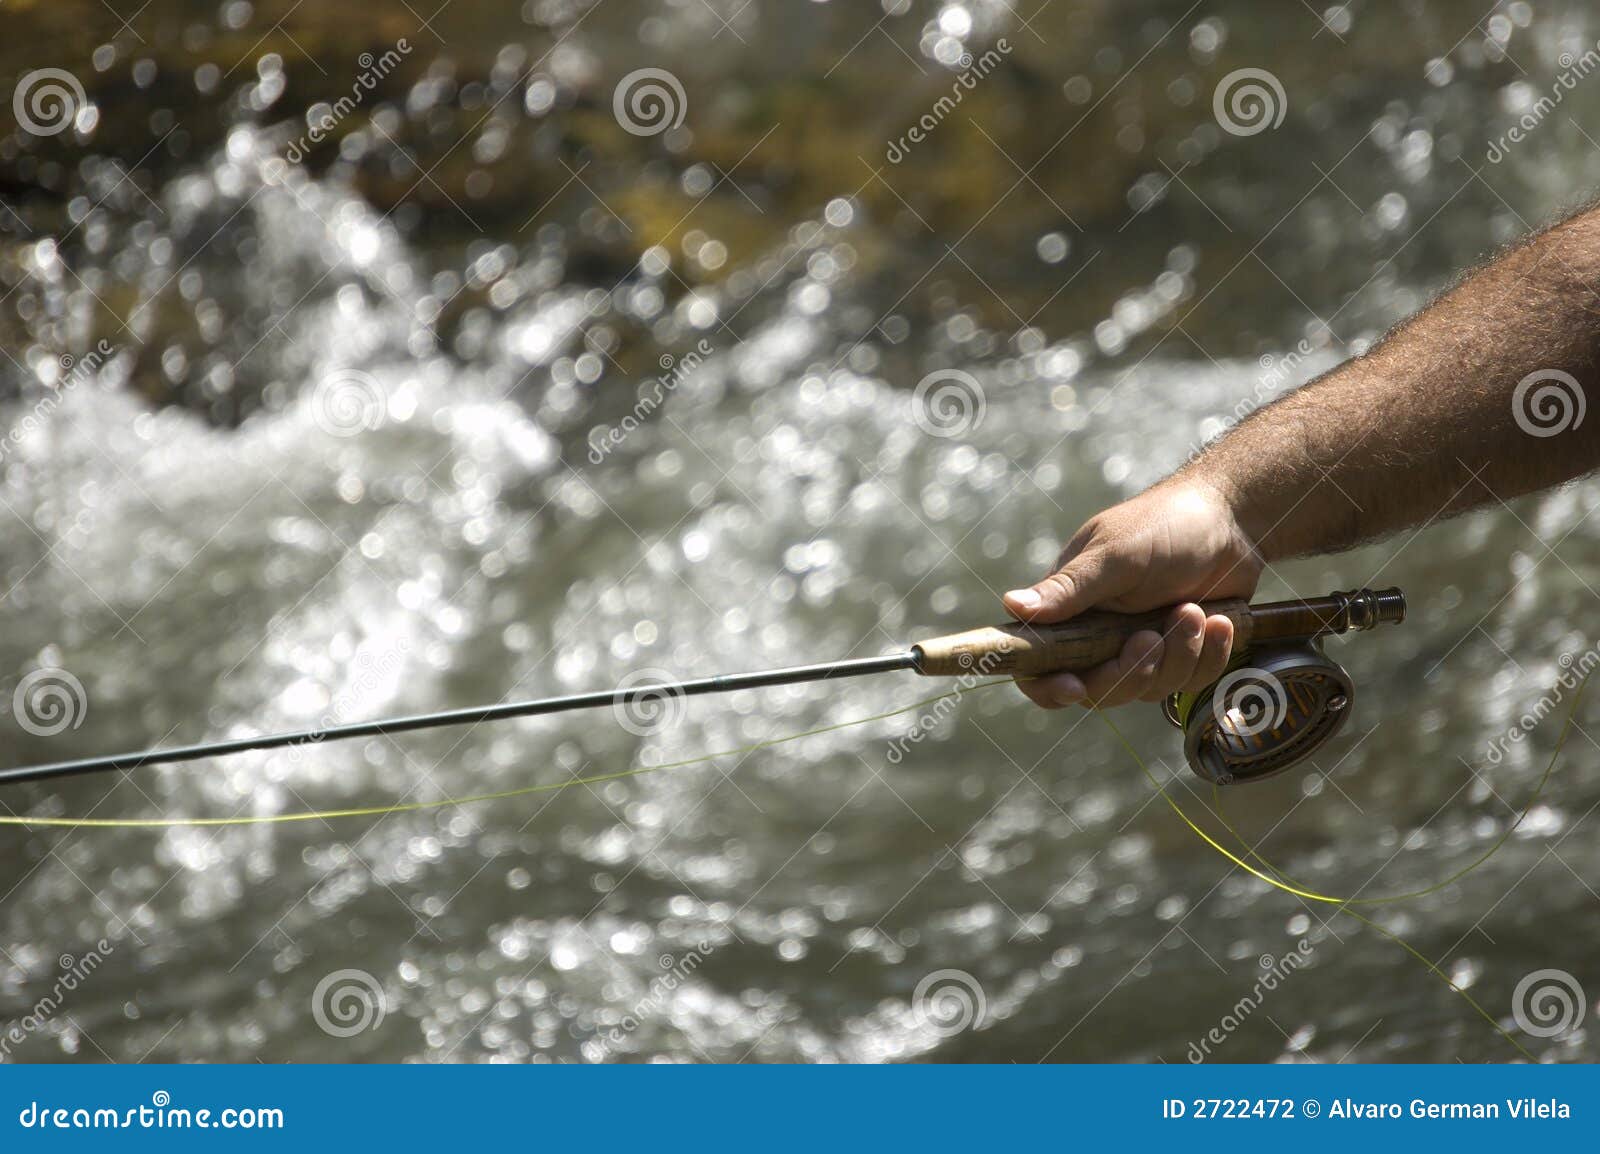 angling on the river